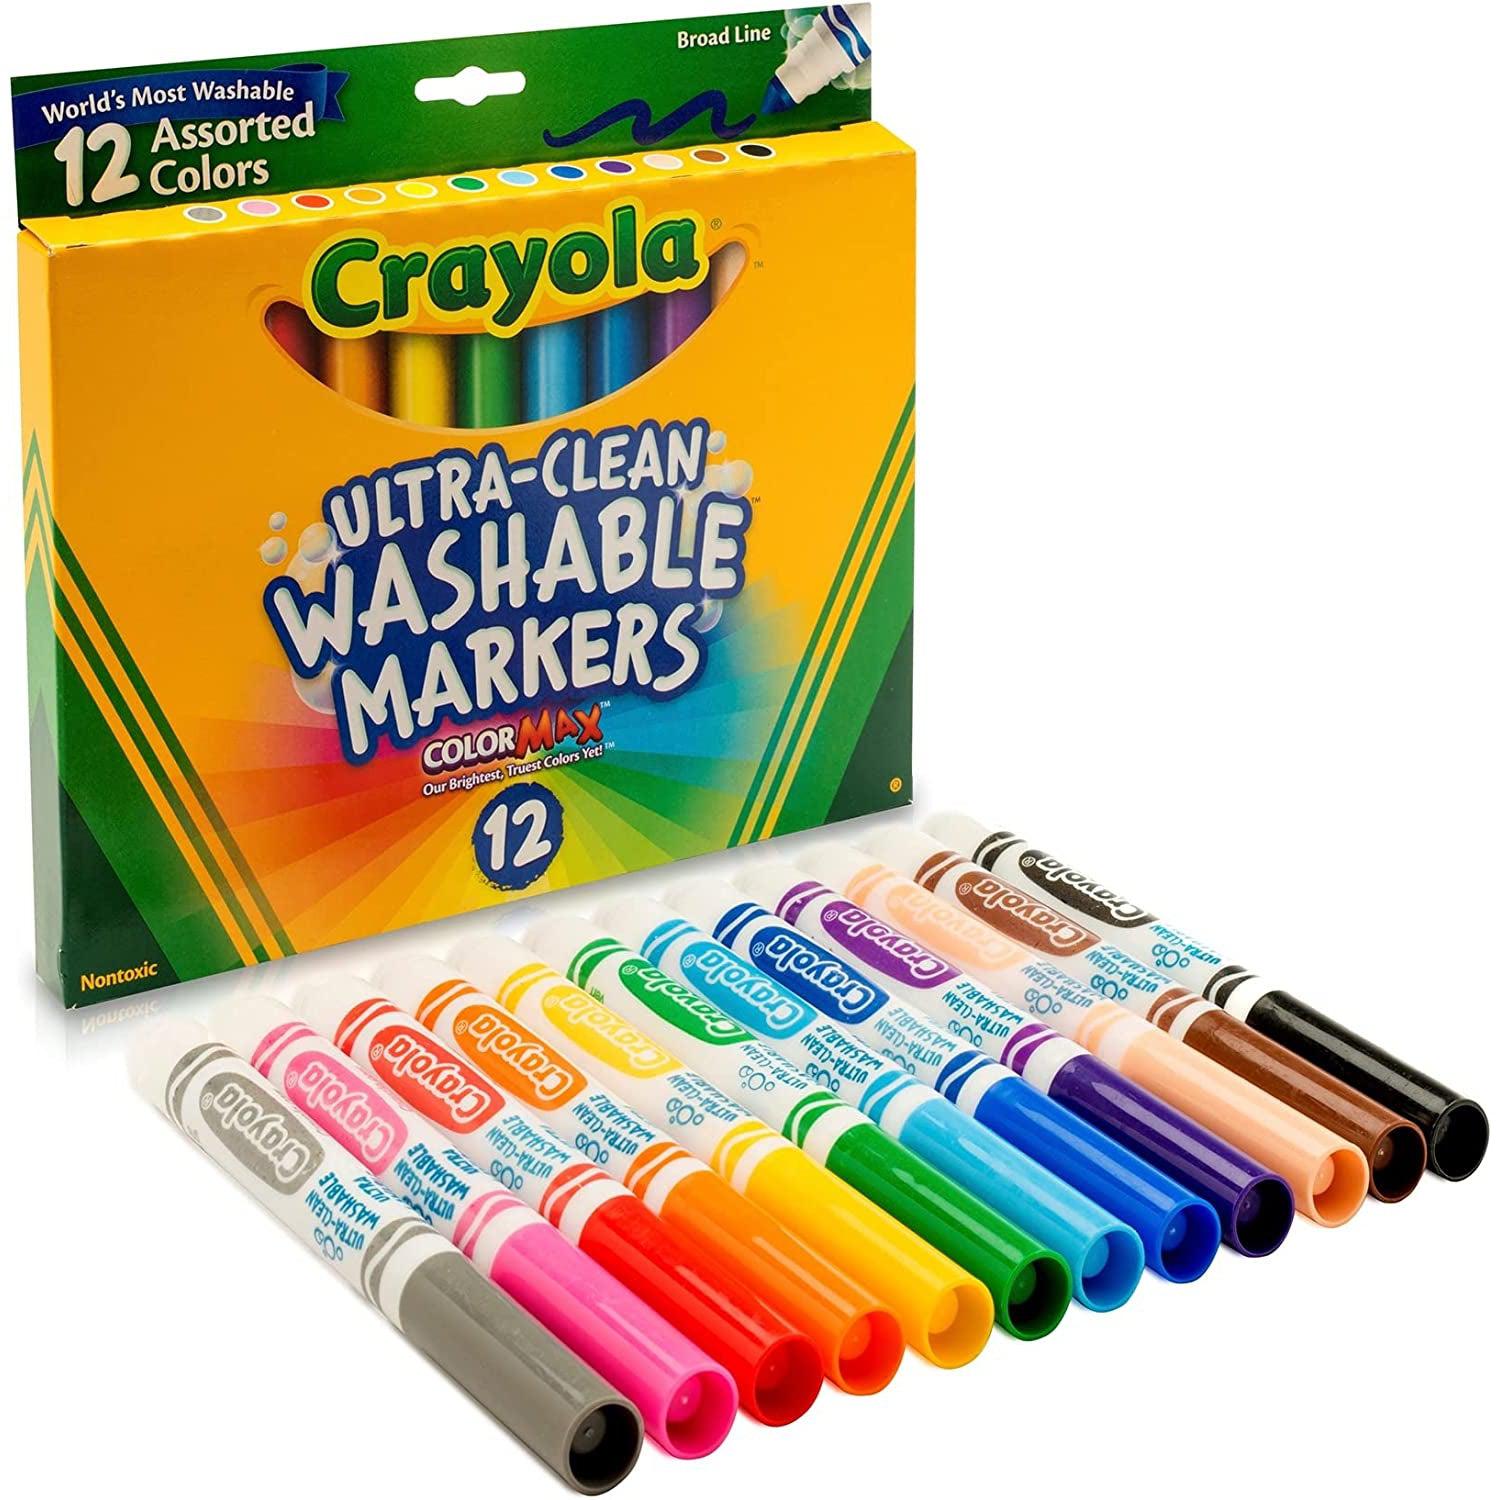 18 Colors Jumbo Crayons for Kids Ages 2-4 - Non Toxic Washable